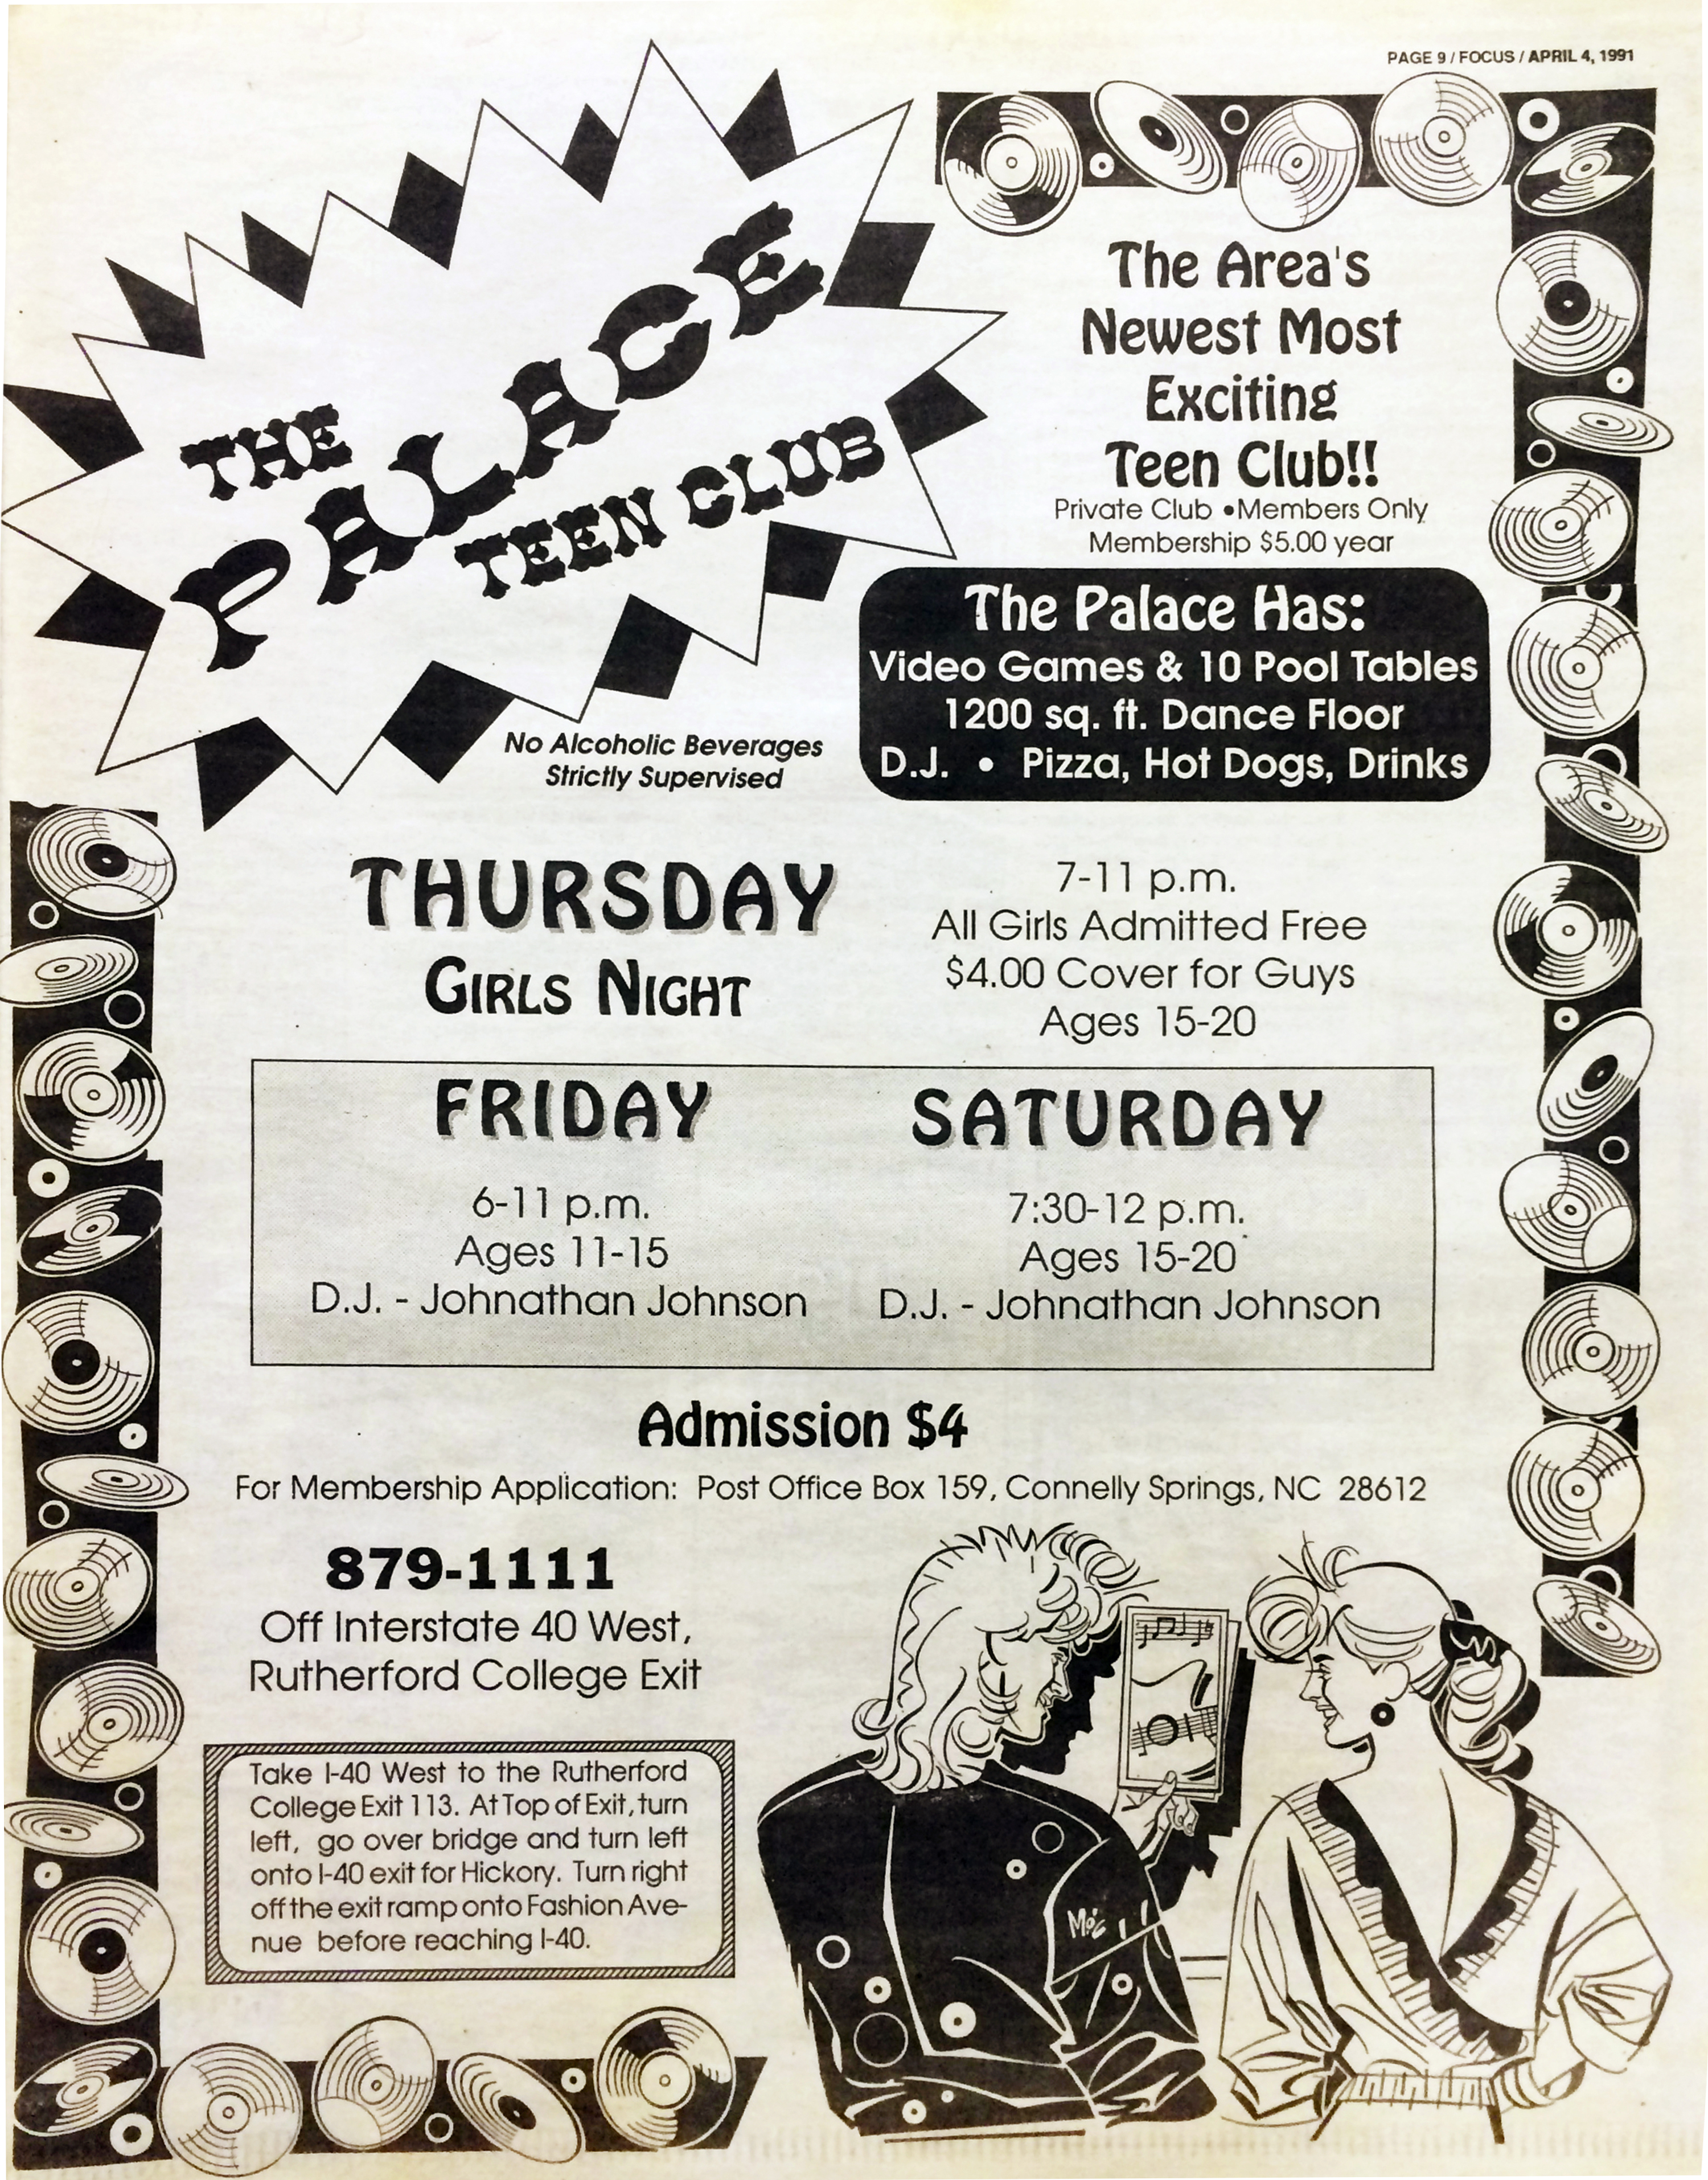 Advertisement for The Palace published April 4, 1991.